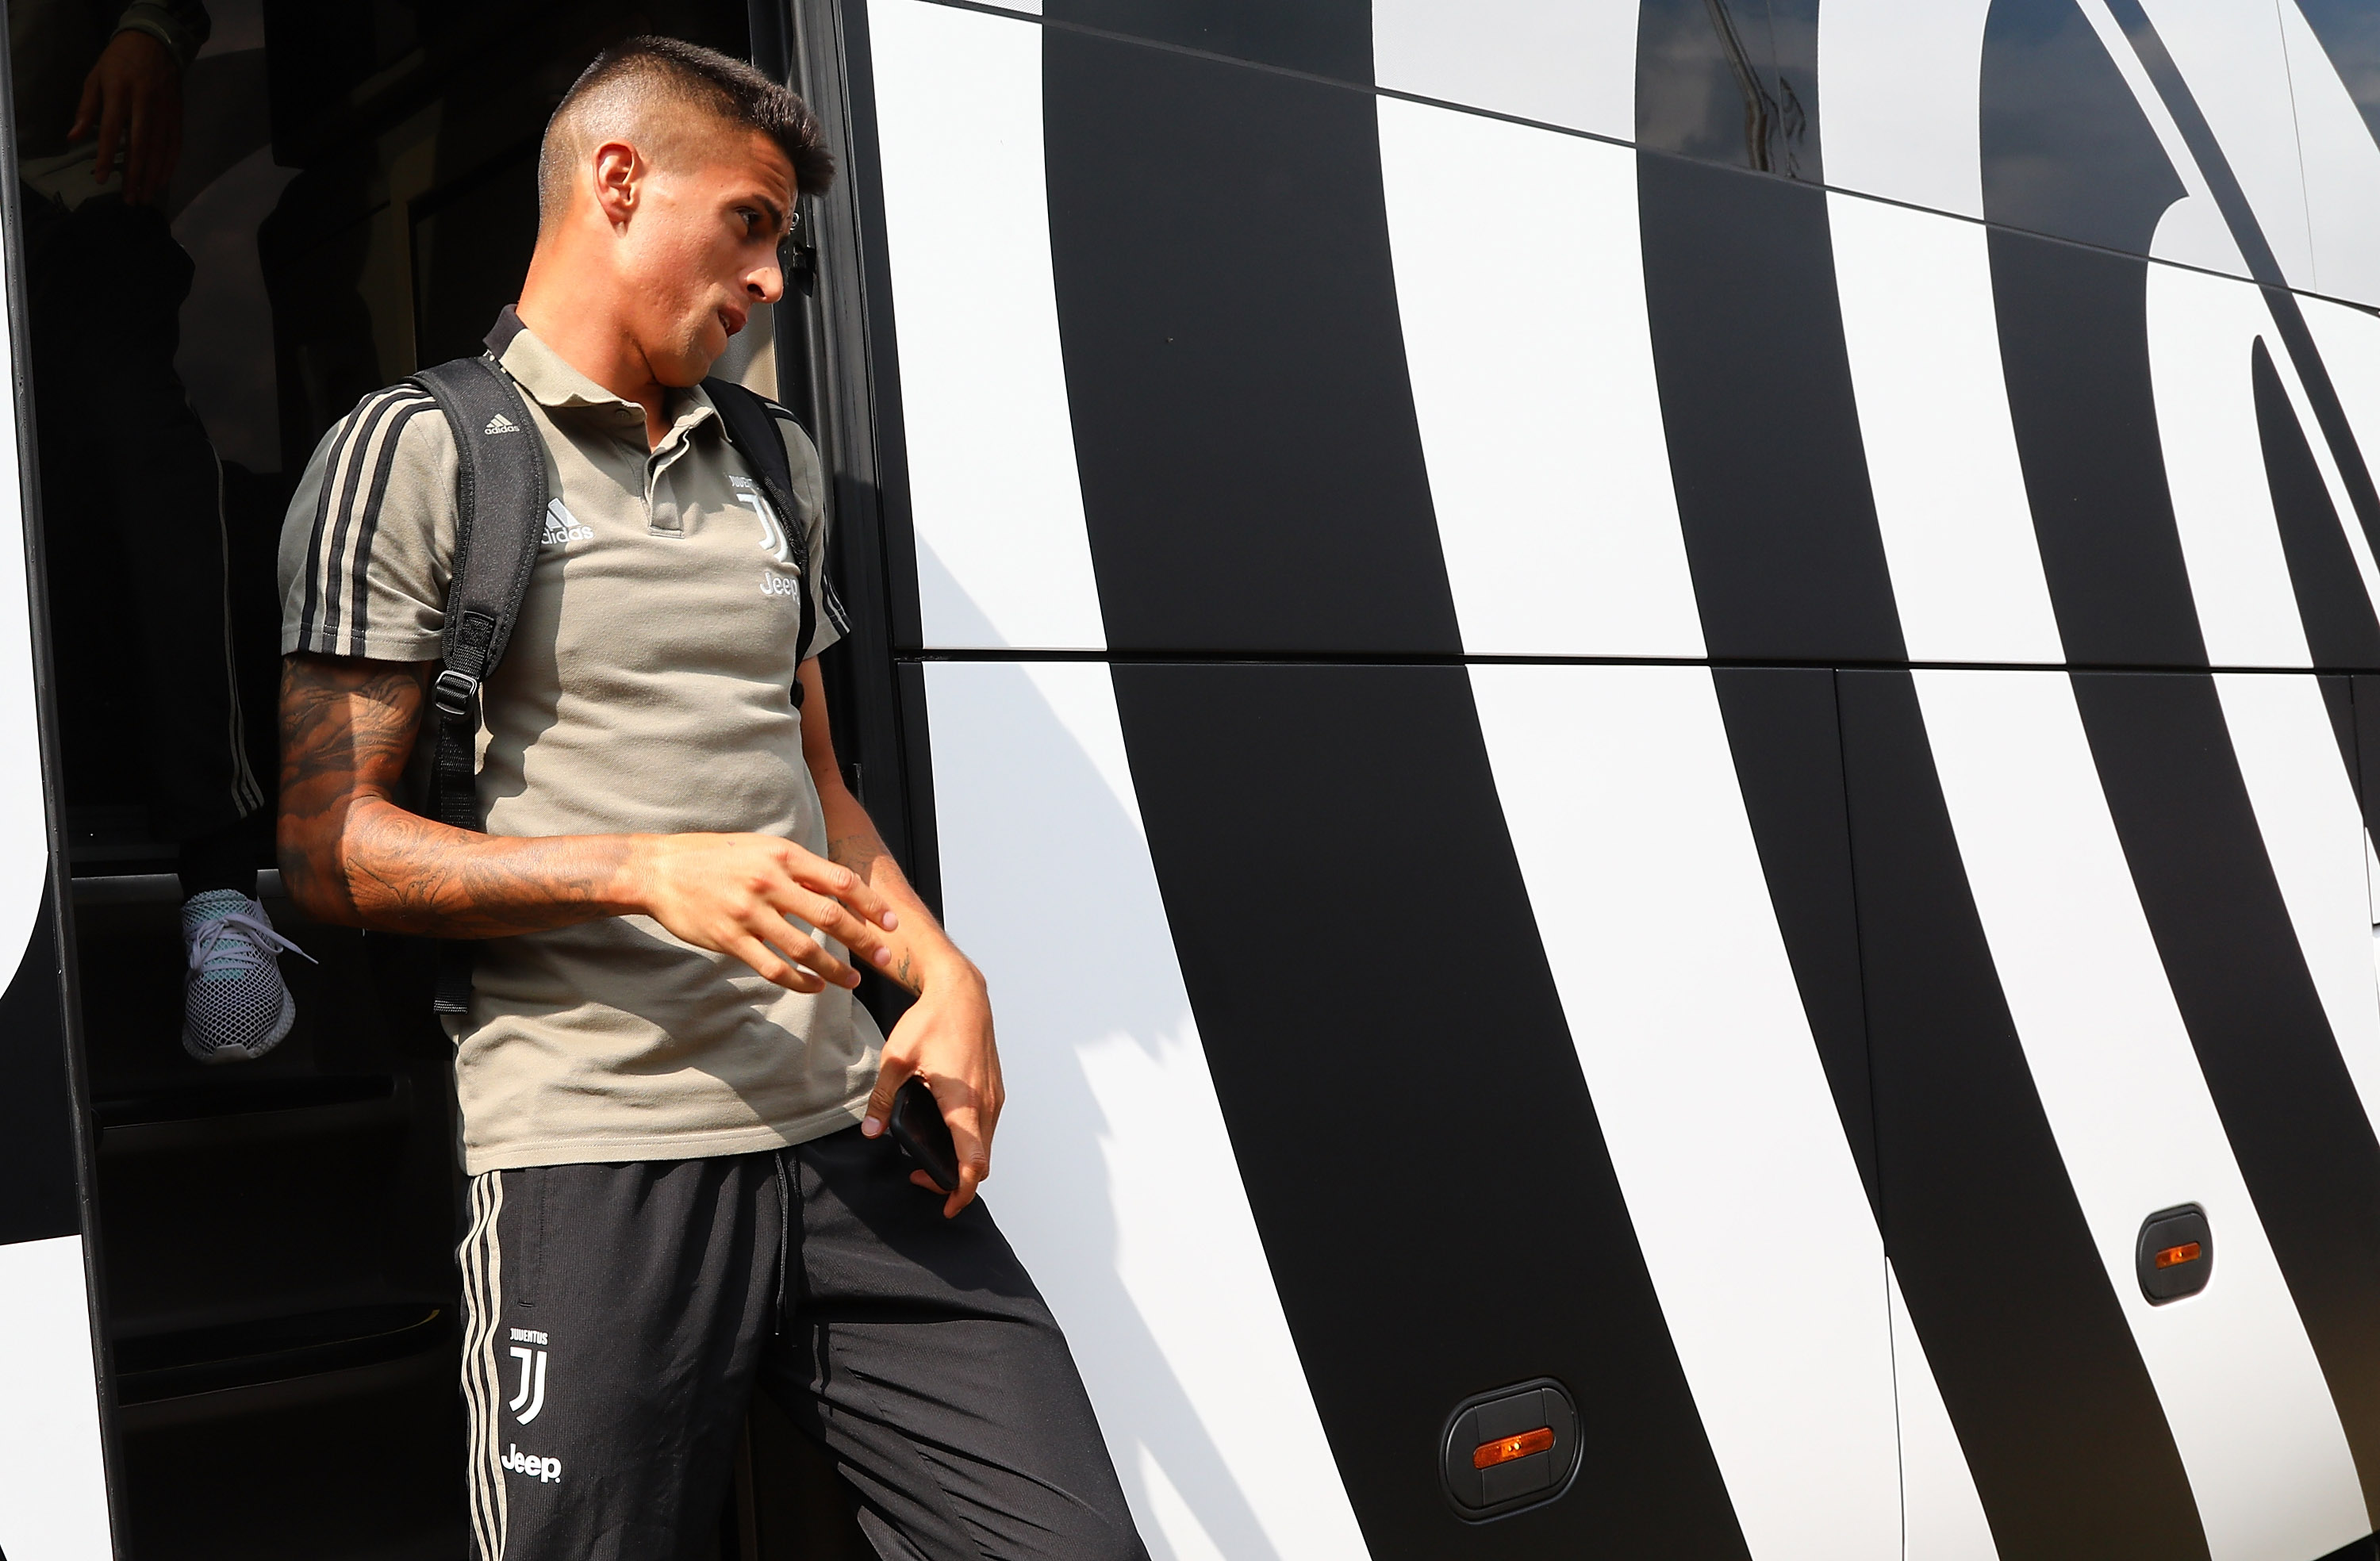 VILLAR PEROSA, ITALY - AUGUST 12:  Joao Cancelo of Juventus arrive at the Pre-Season Friendly match between Juventus and Juventus U19 on August 12, 2018 in Villar Perosa, Italy.  (Photo by Marco Luzzani/Getty Images)